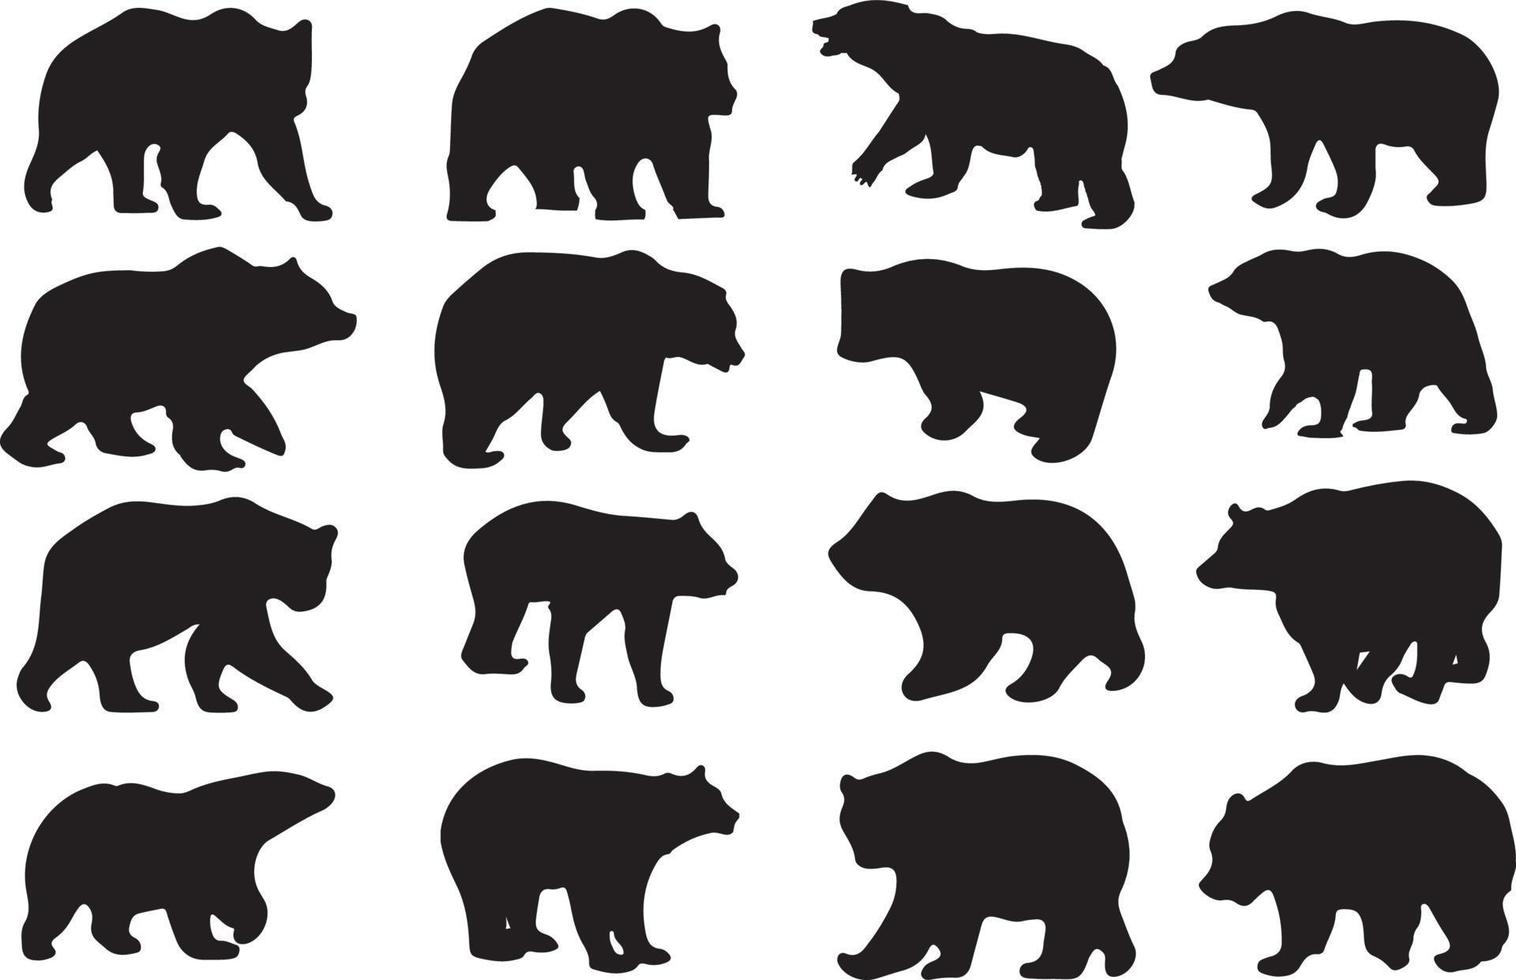 The set of Bear Silhouette collection vector